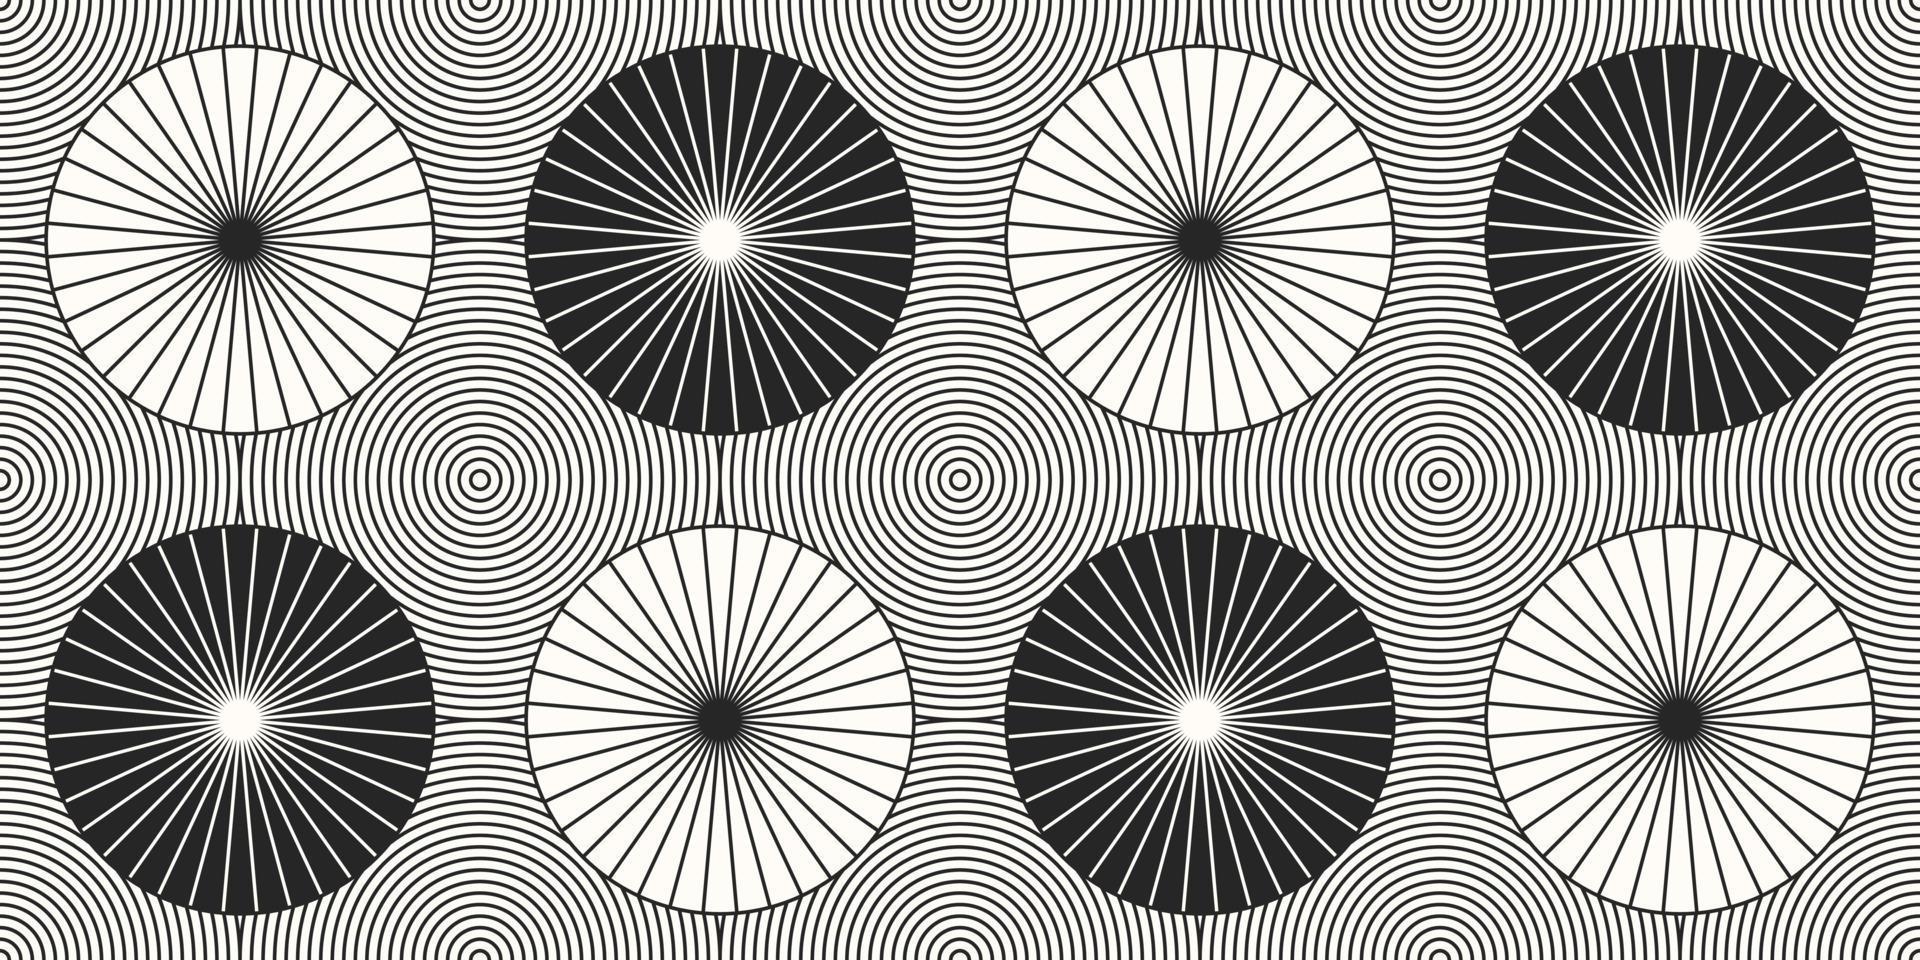 Abstract geometric seamless pattern circle design. Vector illustration. Eps10